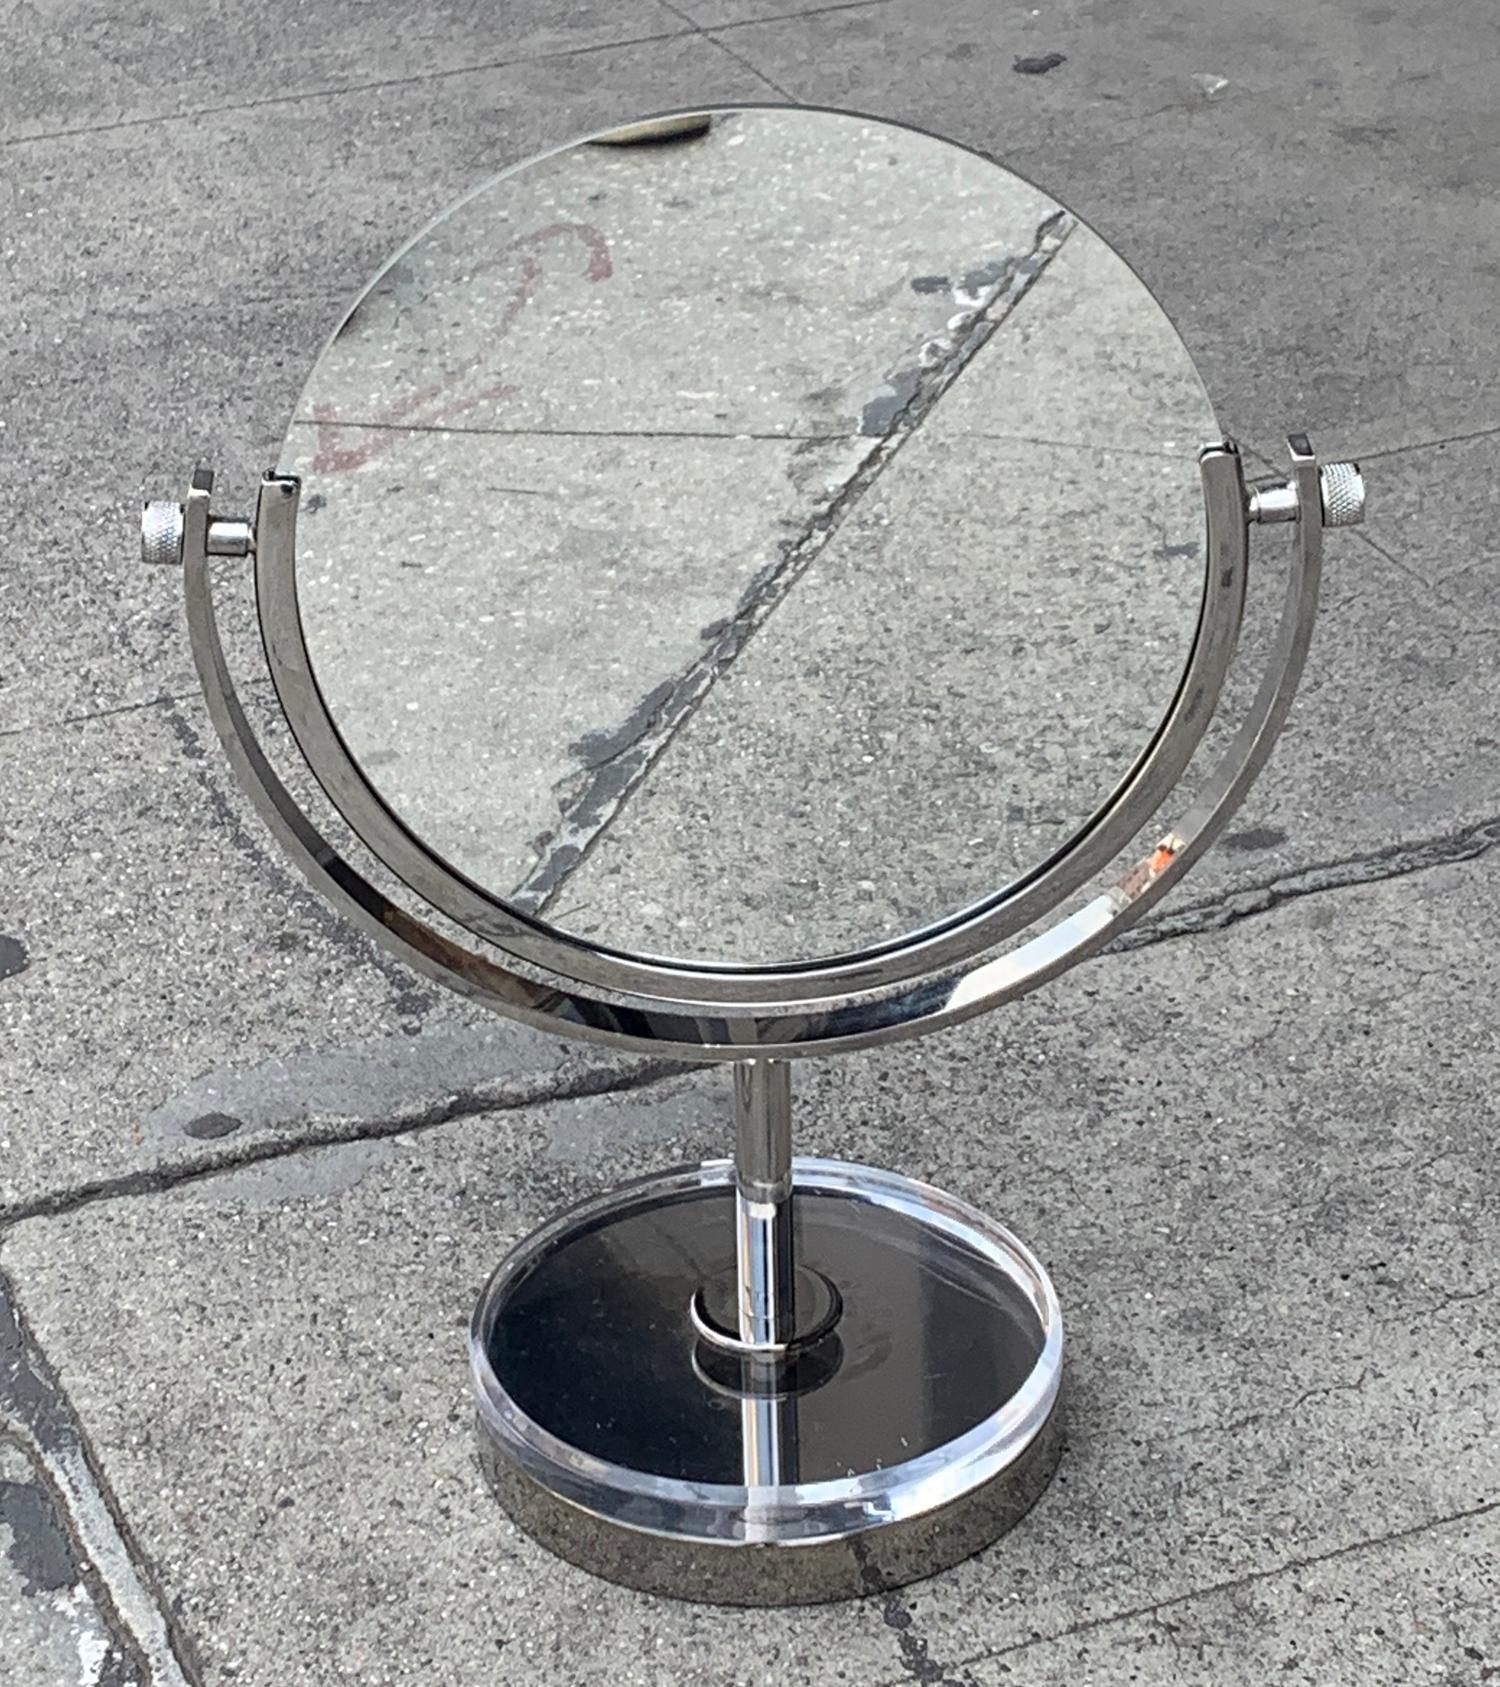 Beautiful two sided vanity mirror in polished nickel and Lucite by Charles Hollis Jones dating from the early to mid-1970s.
The mirror is in good vintage condition, minor wear due to age, no pitting or rusting and the mirror is in free of chips or